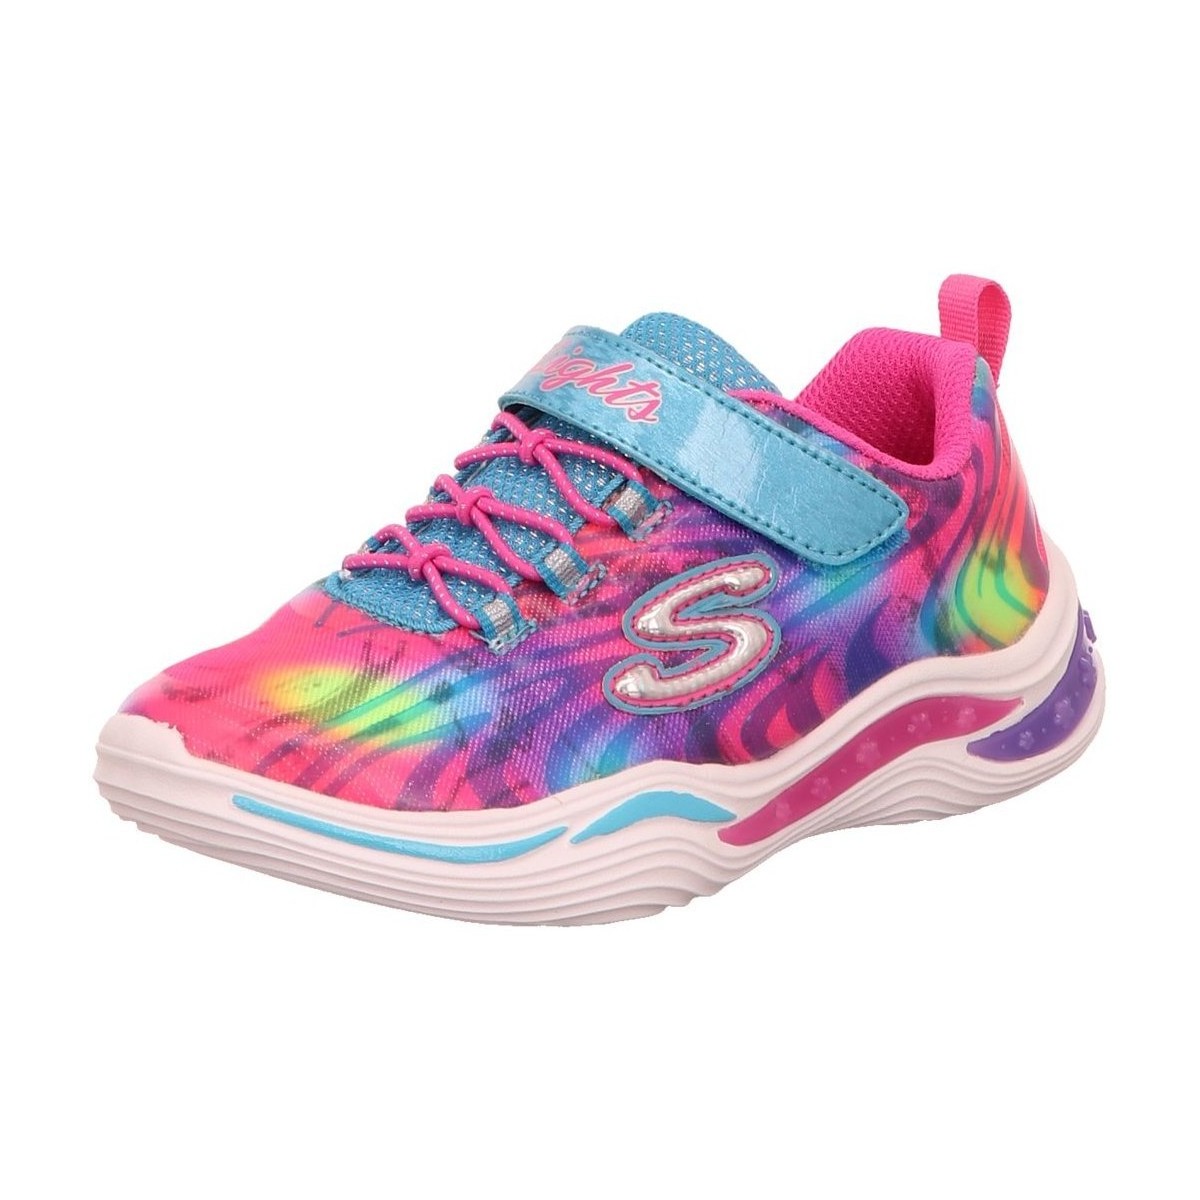 Chaussures Fille Fitness / Training Skechers  Multicolore